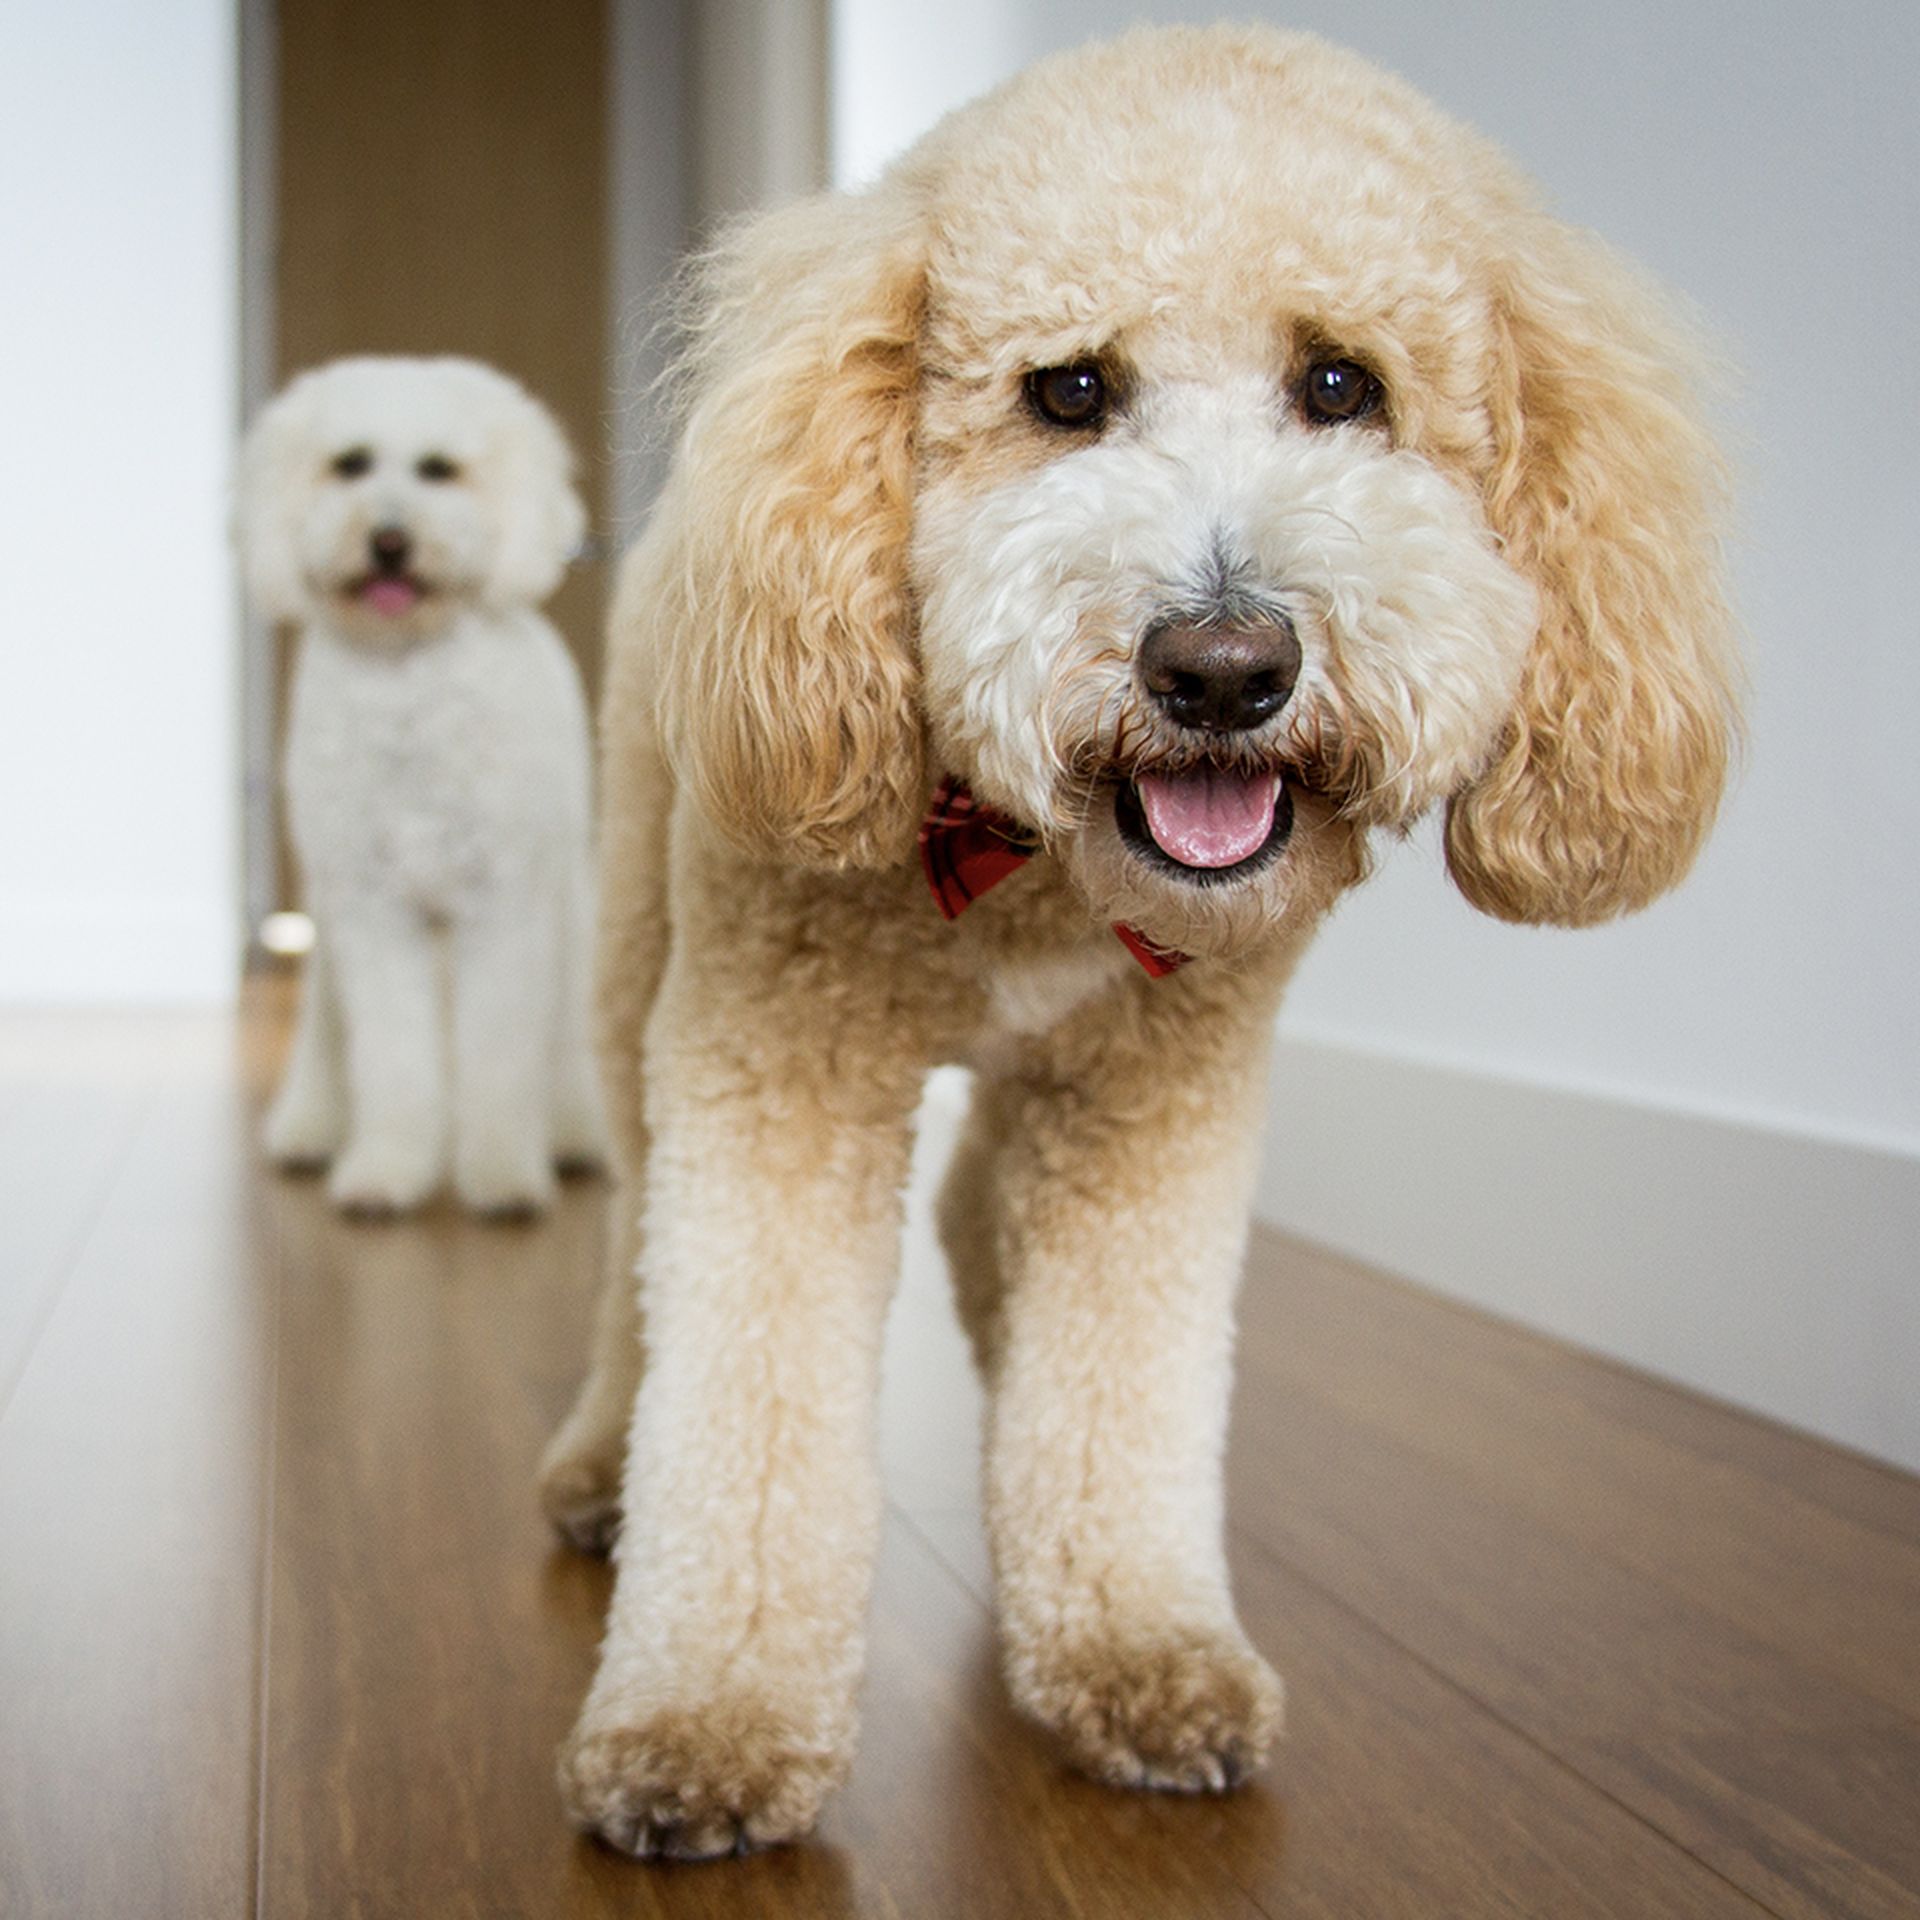 Two goldendoodles happily standing on a wooden floor.